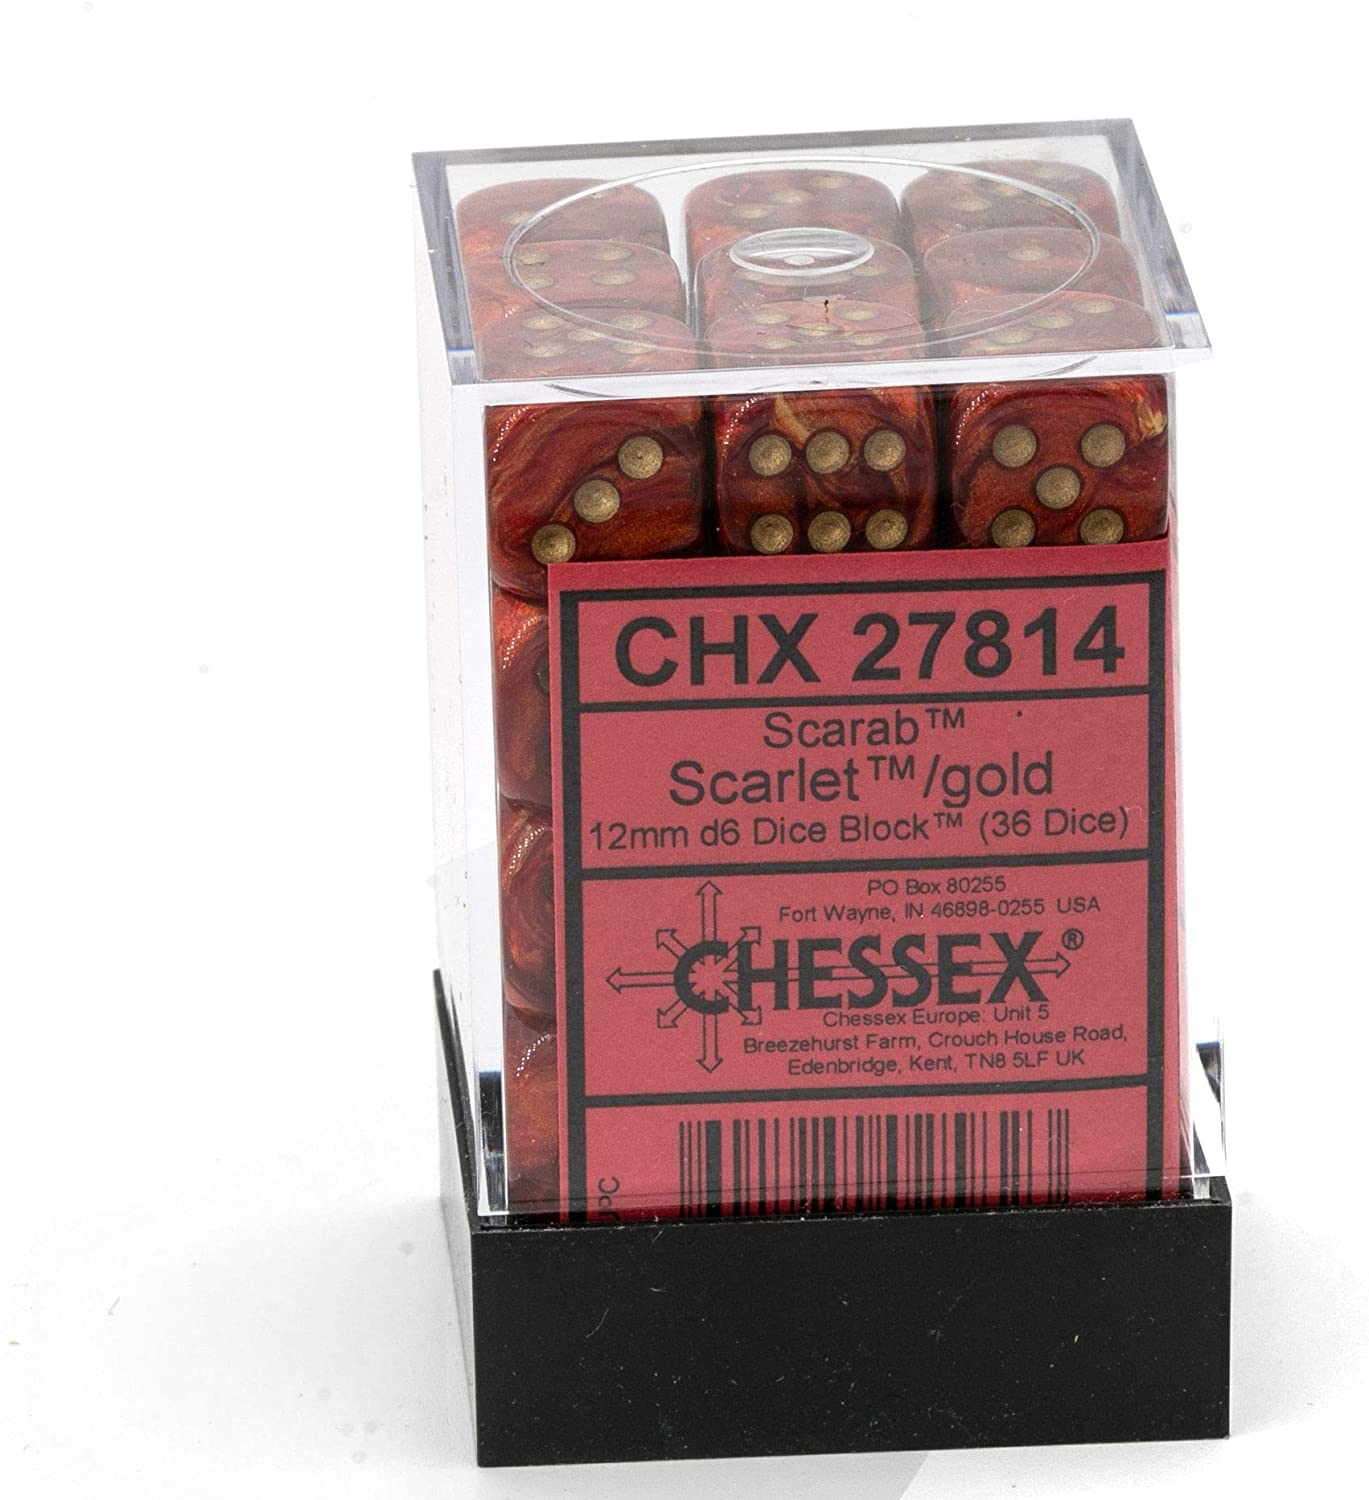 Chessex Dice: D6 Block 12mm - Scarab - Scarlet with Gold (CHX 27814) - Gamescape